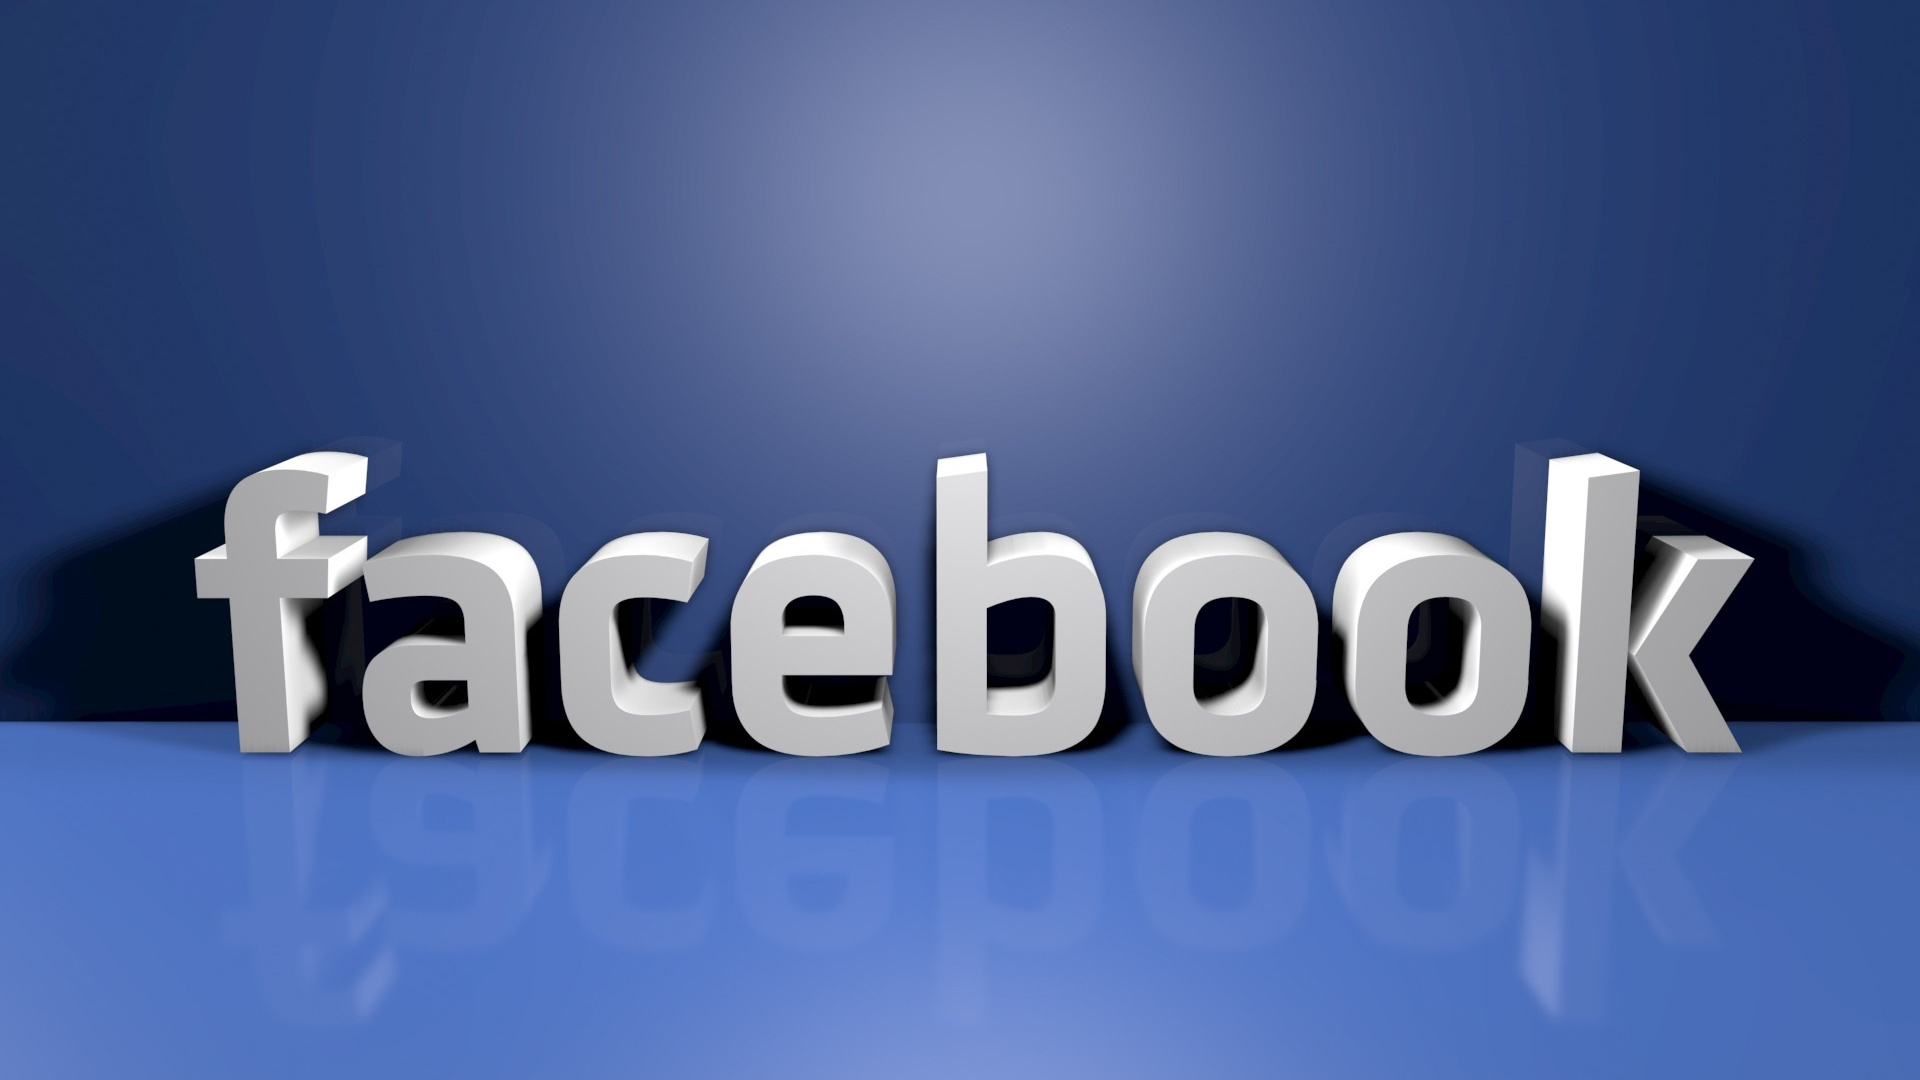 Do Facebook marketing well, you need to know these!